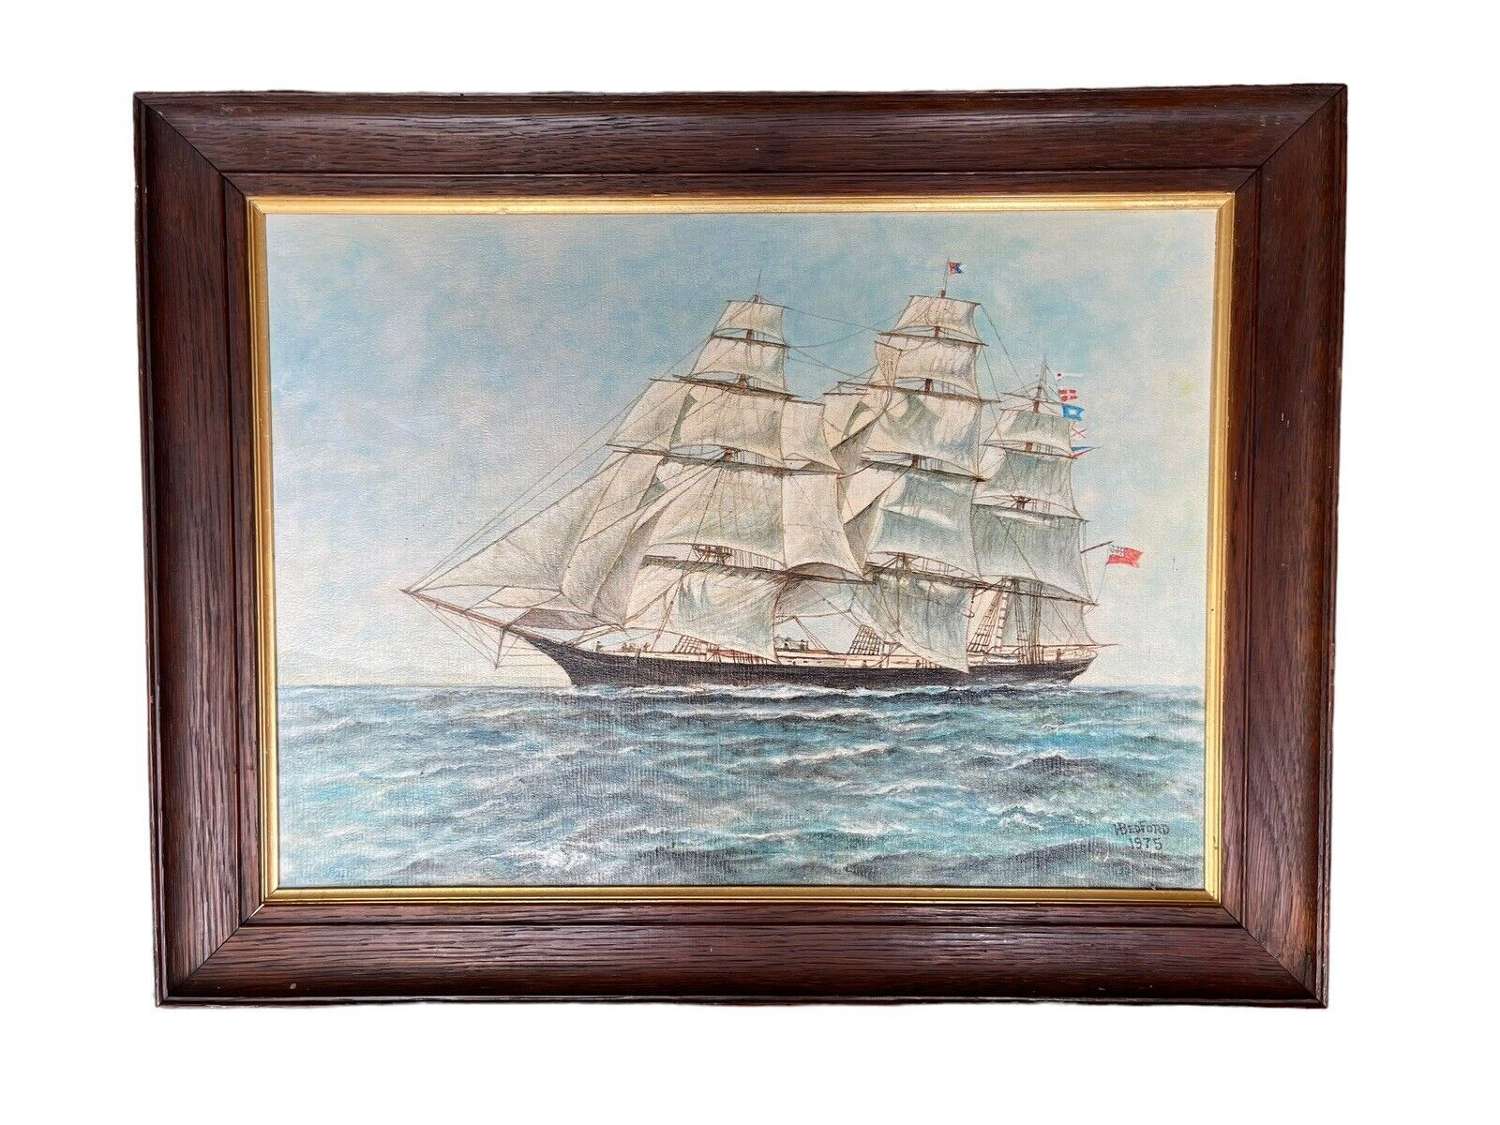 Vintage painting of a sailing ship